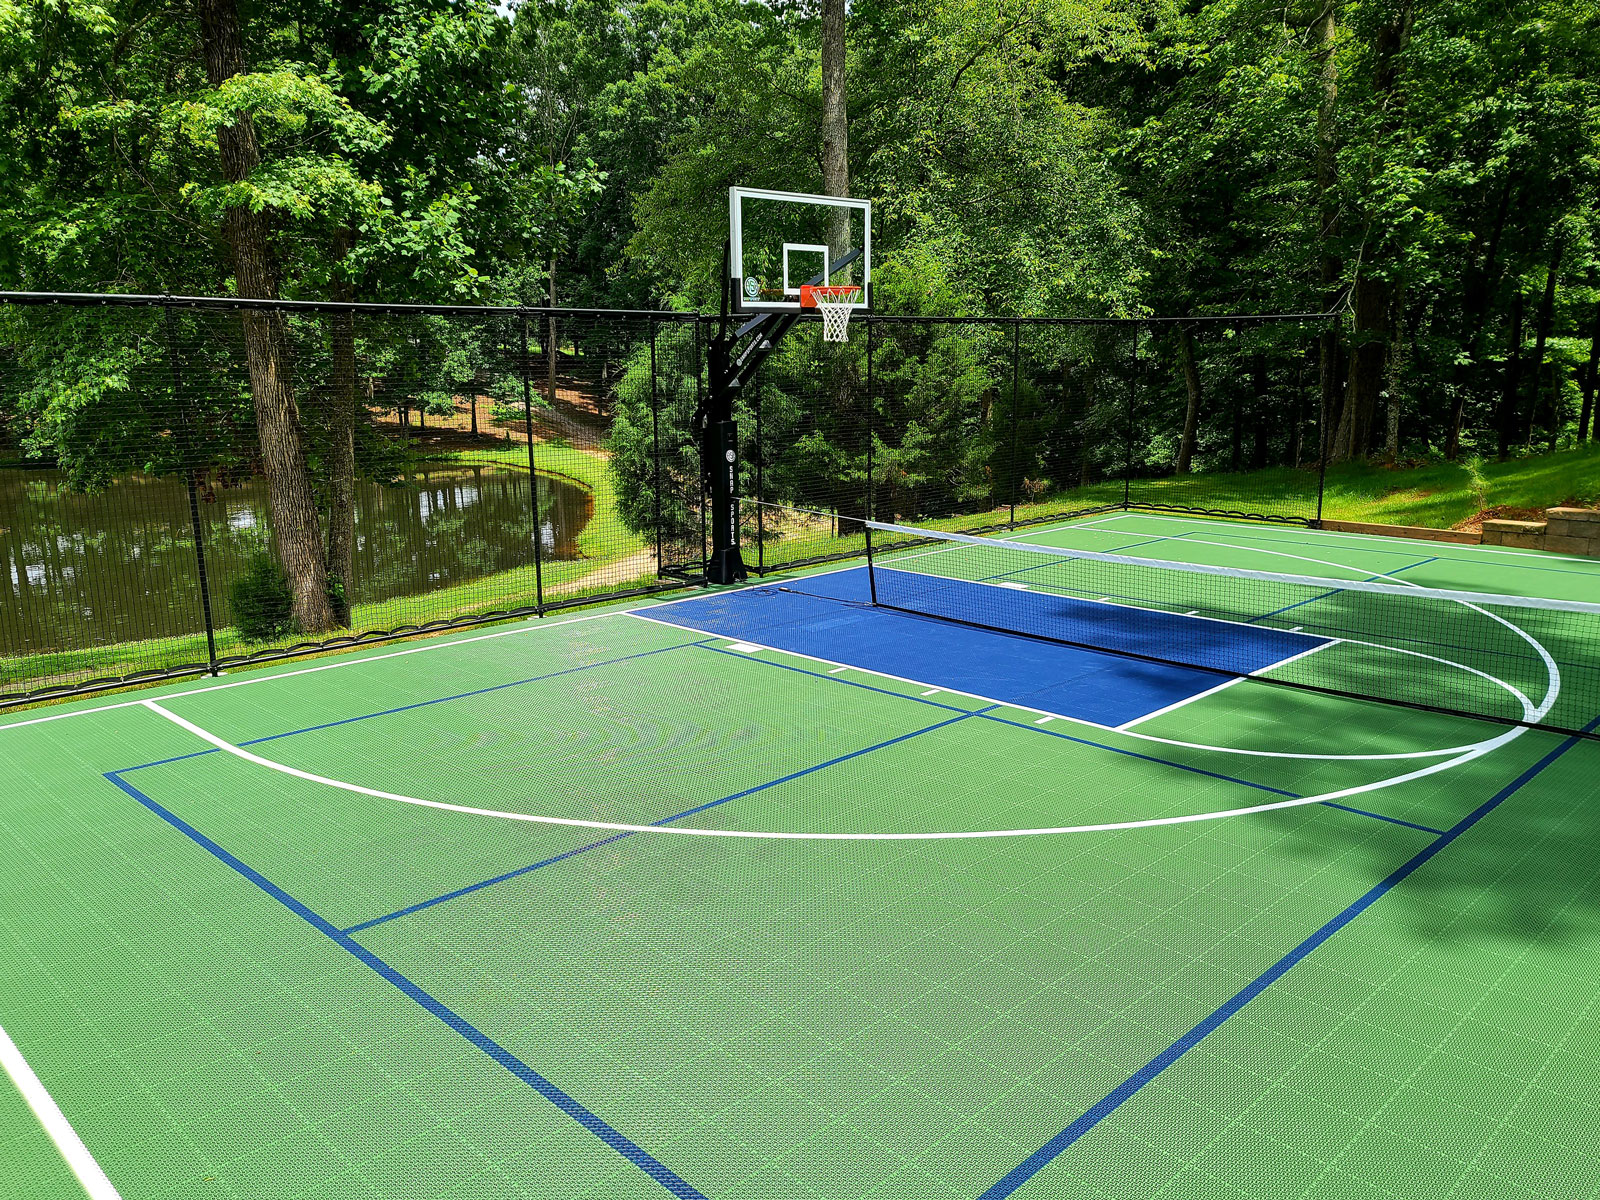 Green outdoor multi-court with blue accents